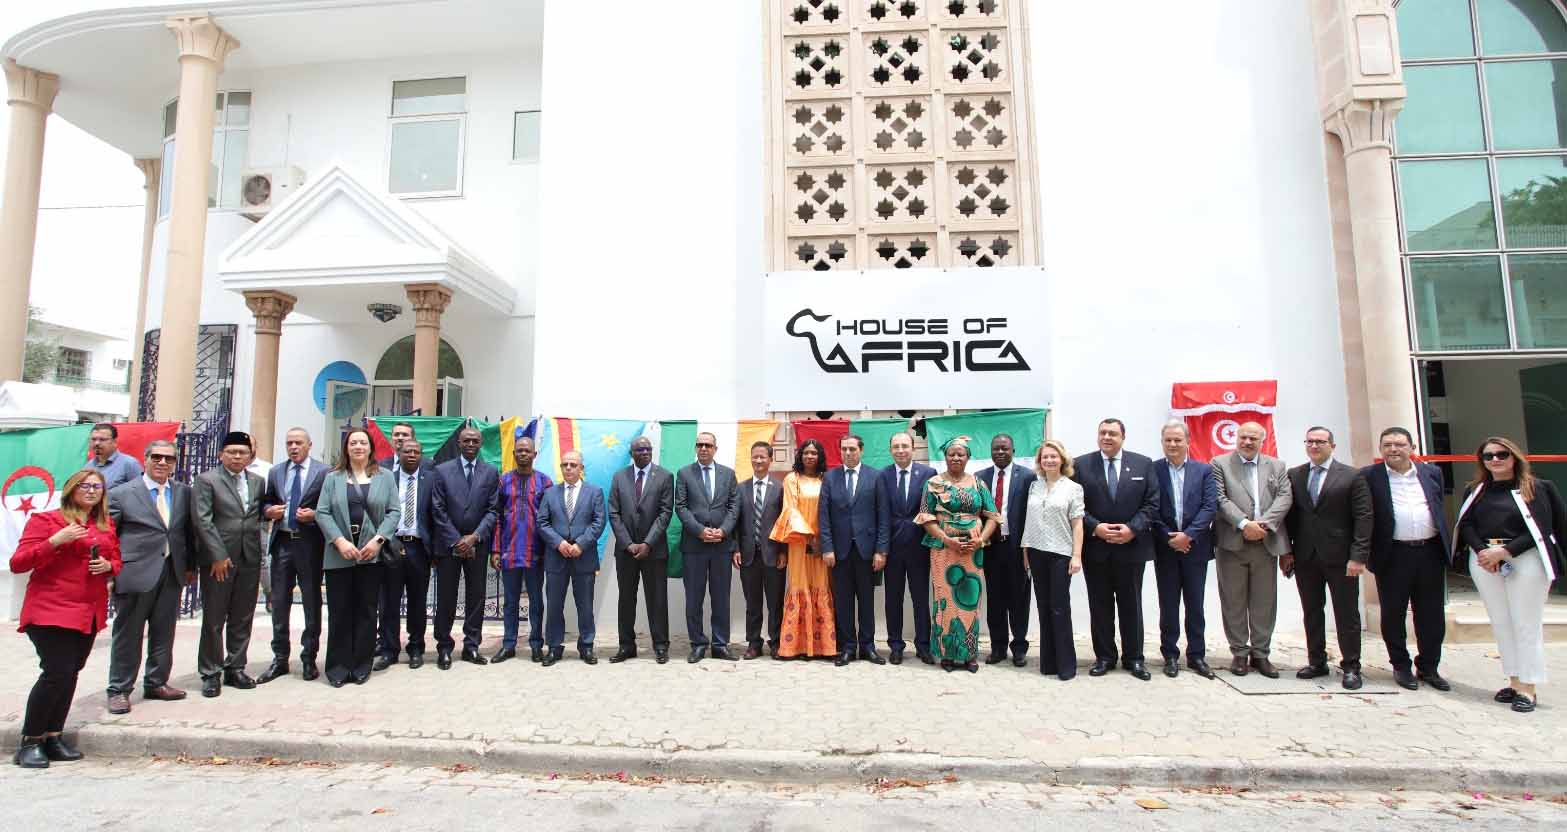 tabc House of Africa inauguration